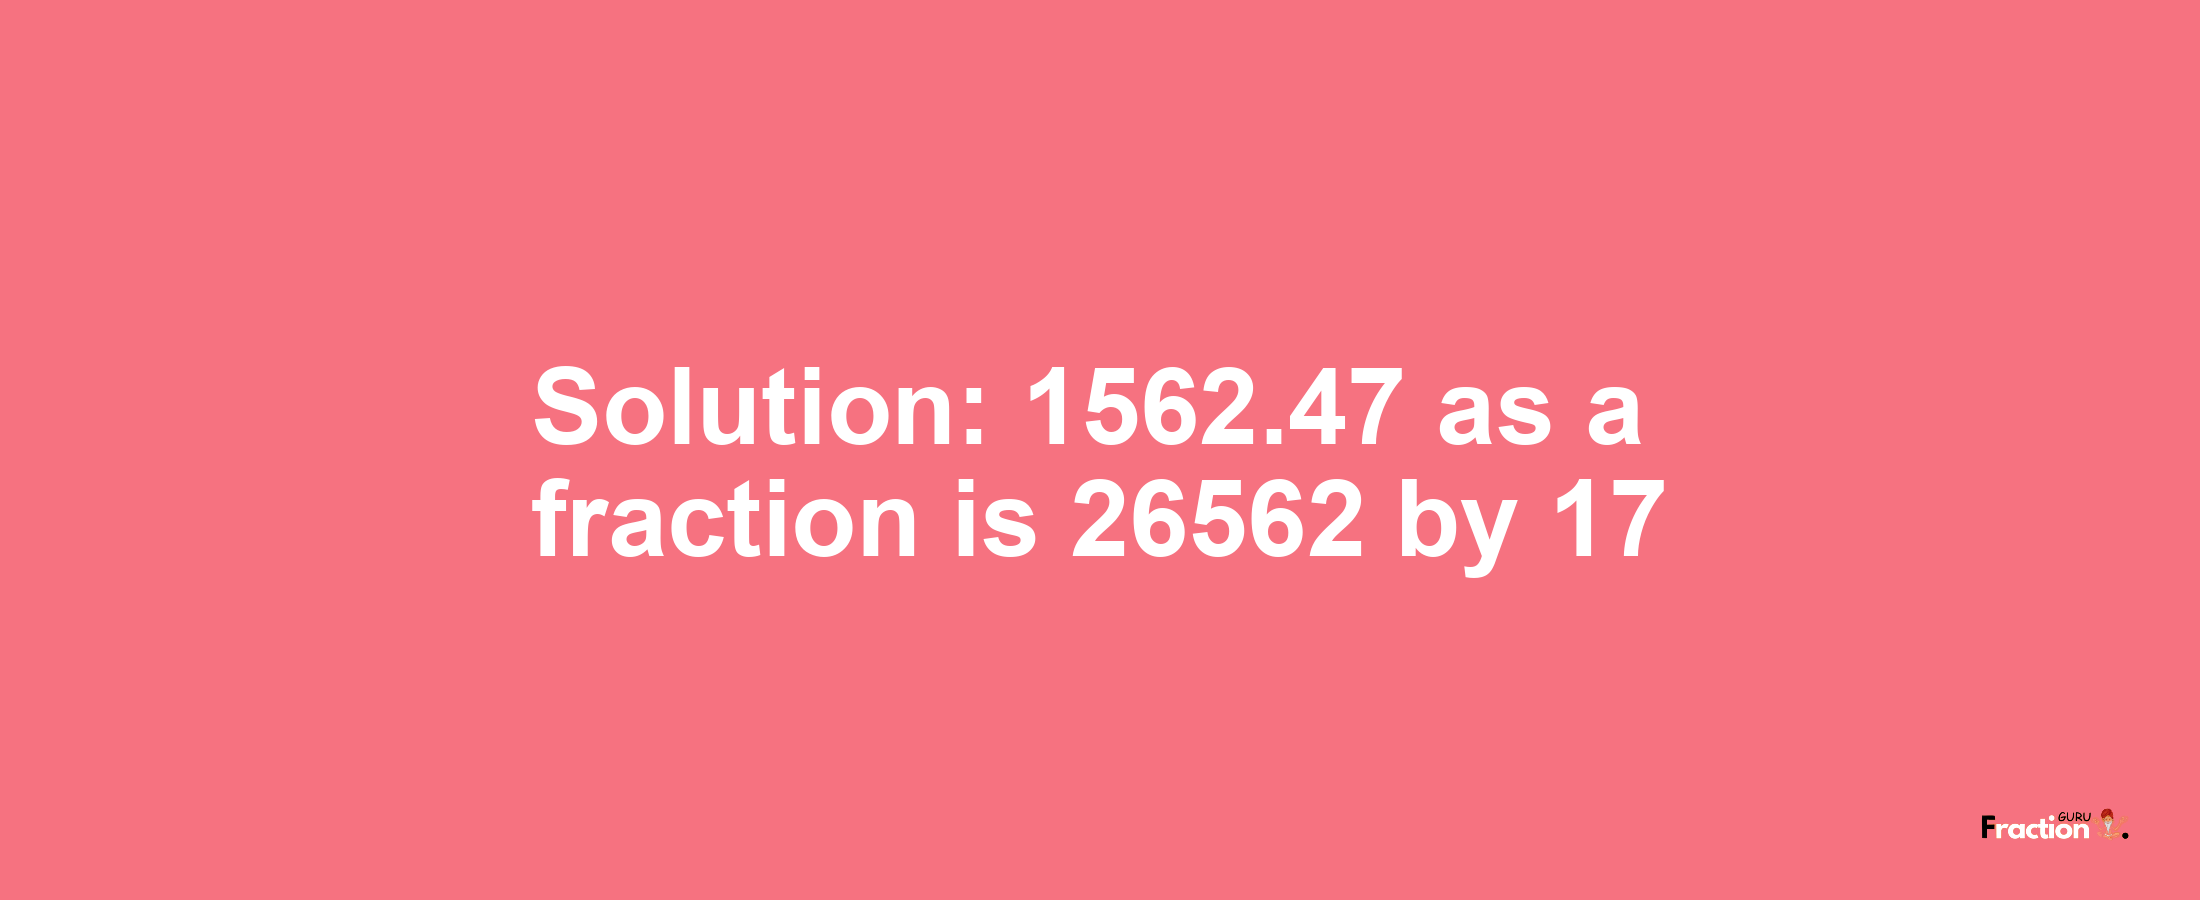 Solution:1562.47 as a fraction is 26562/17